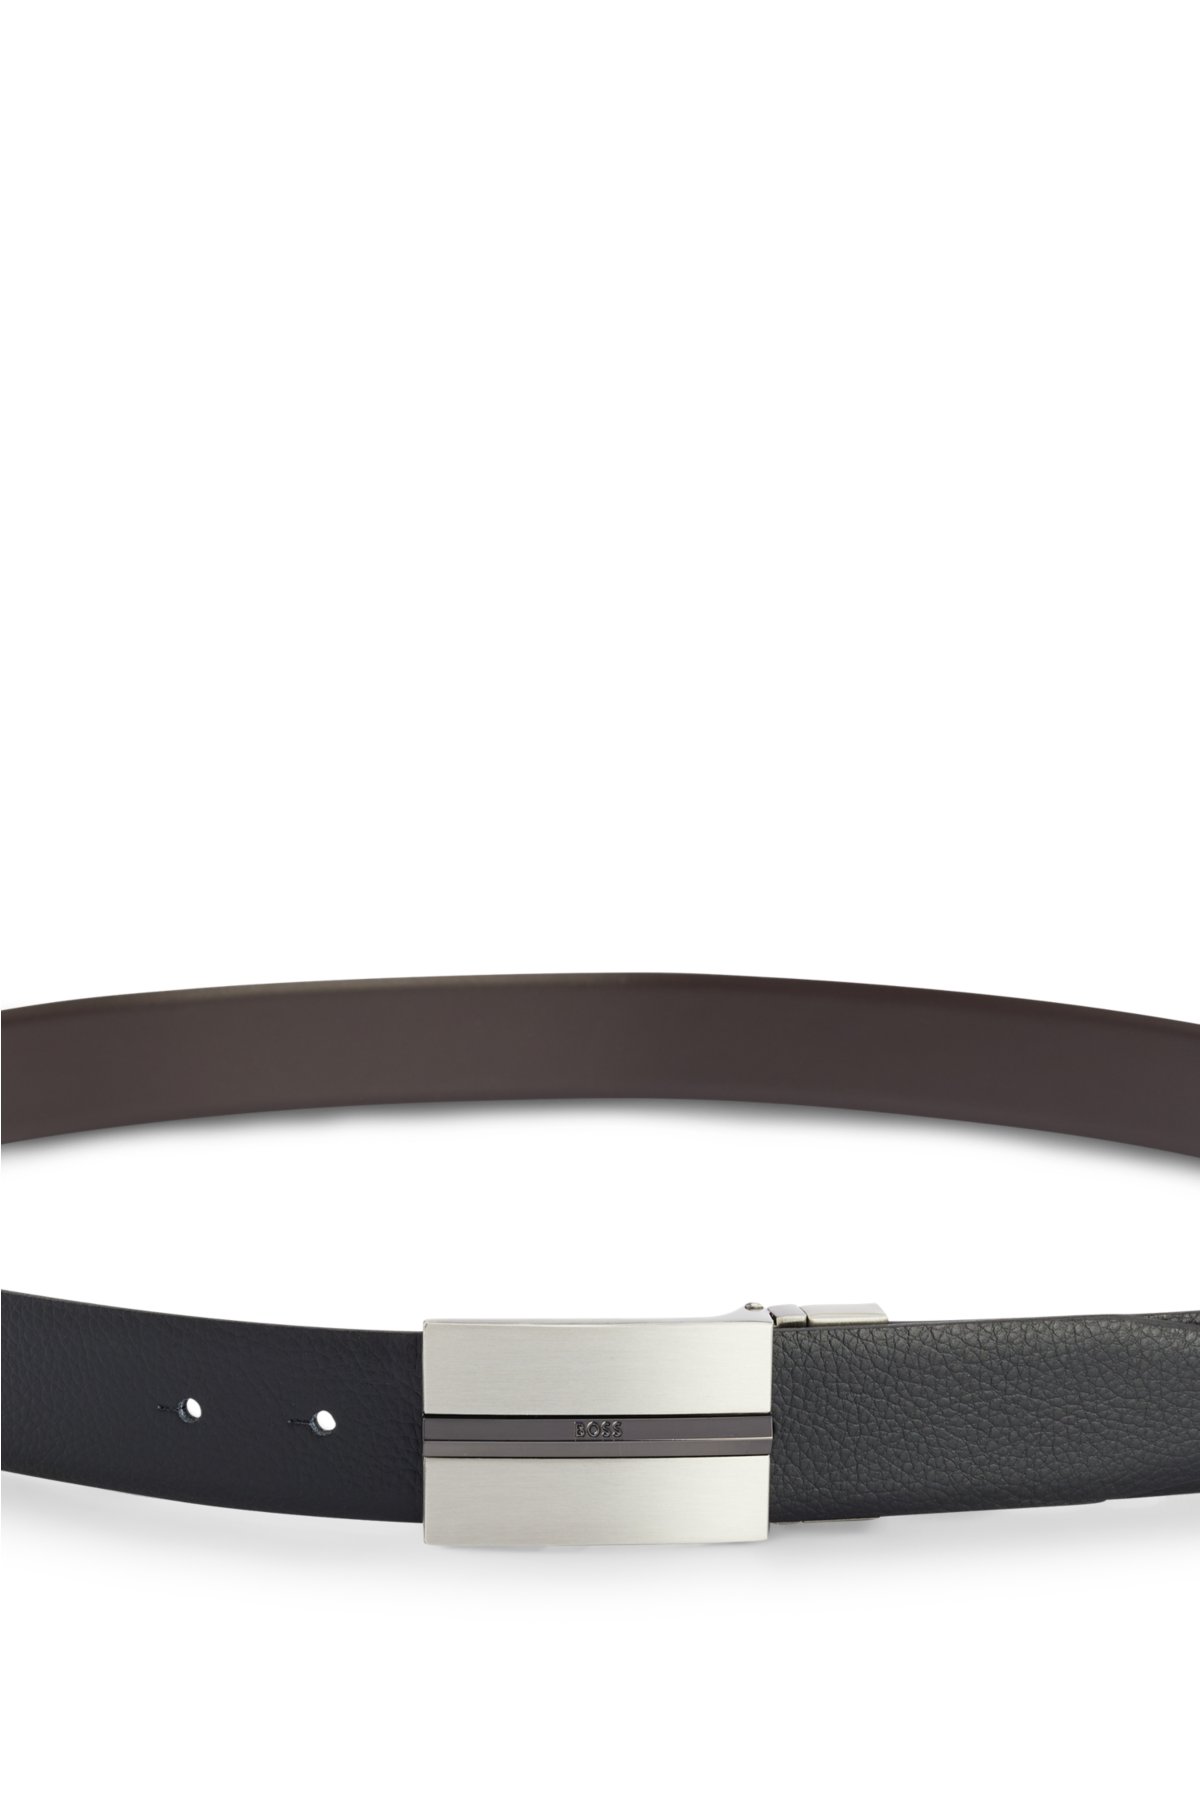 Reversible leather belt with pin and plaque buckles, Black